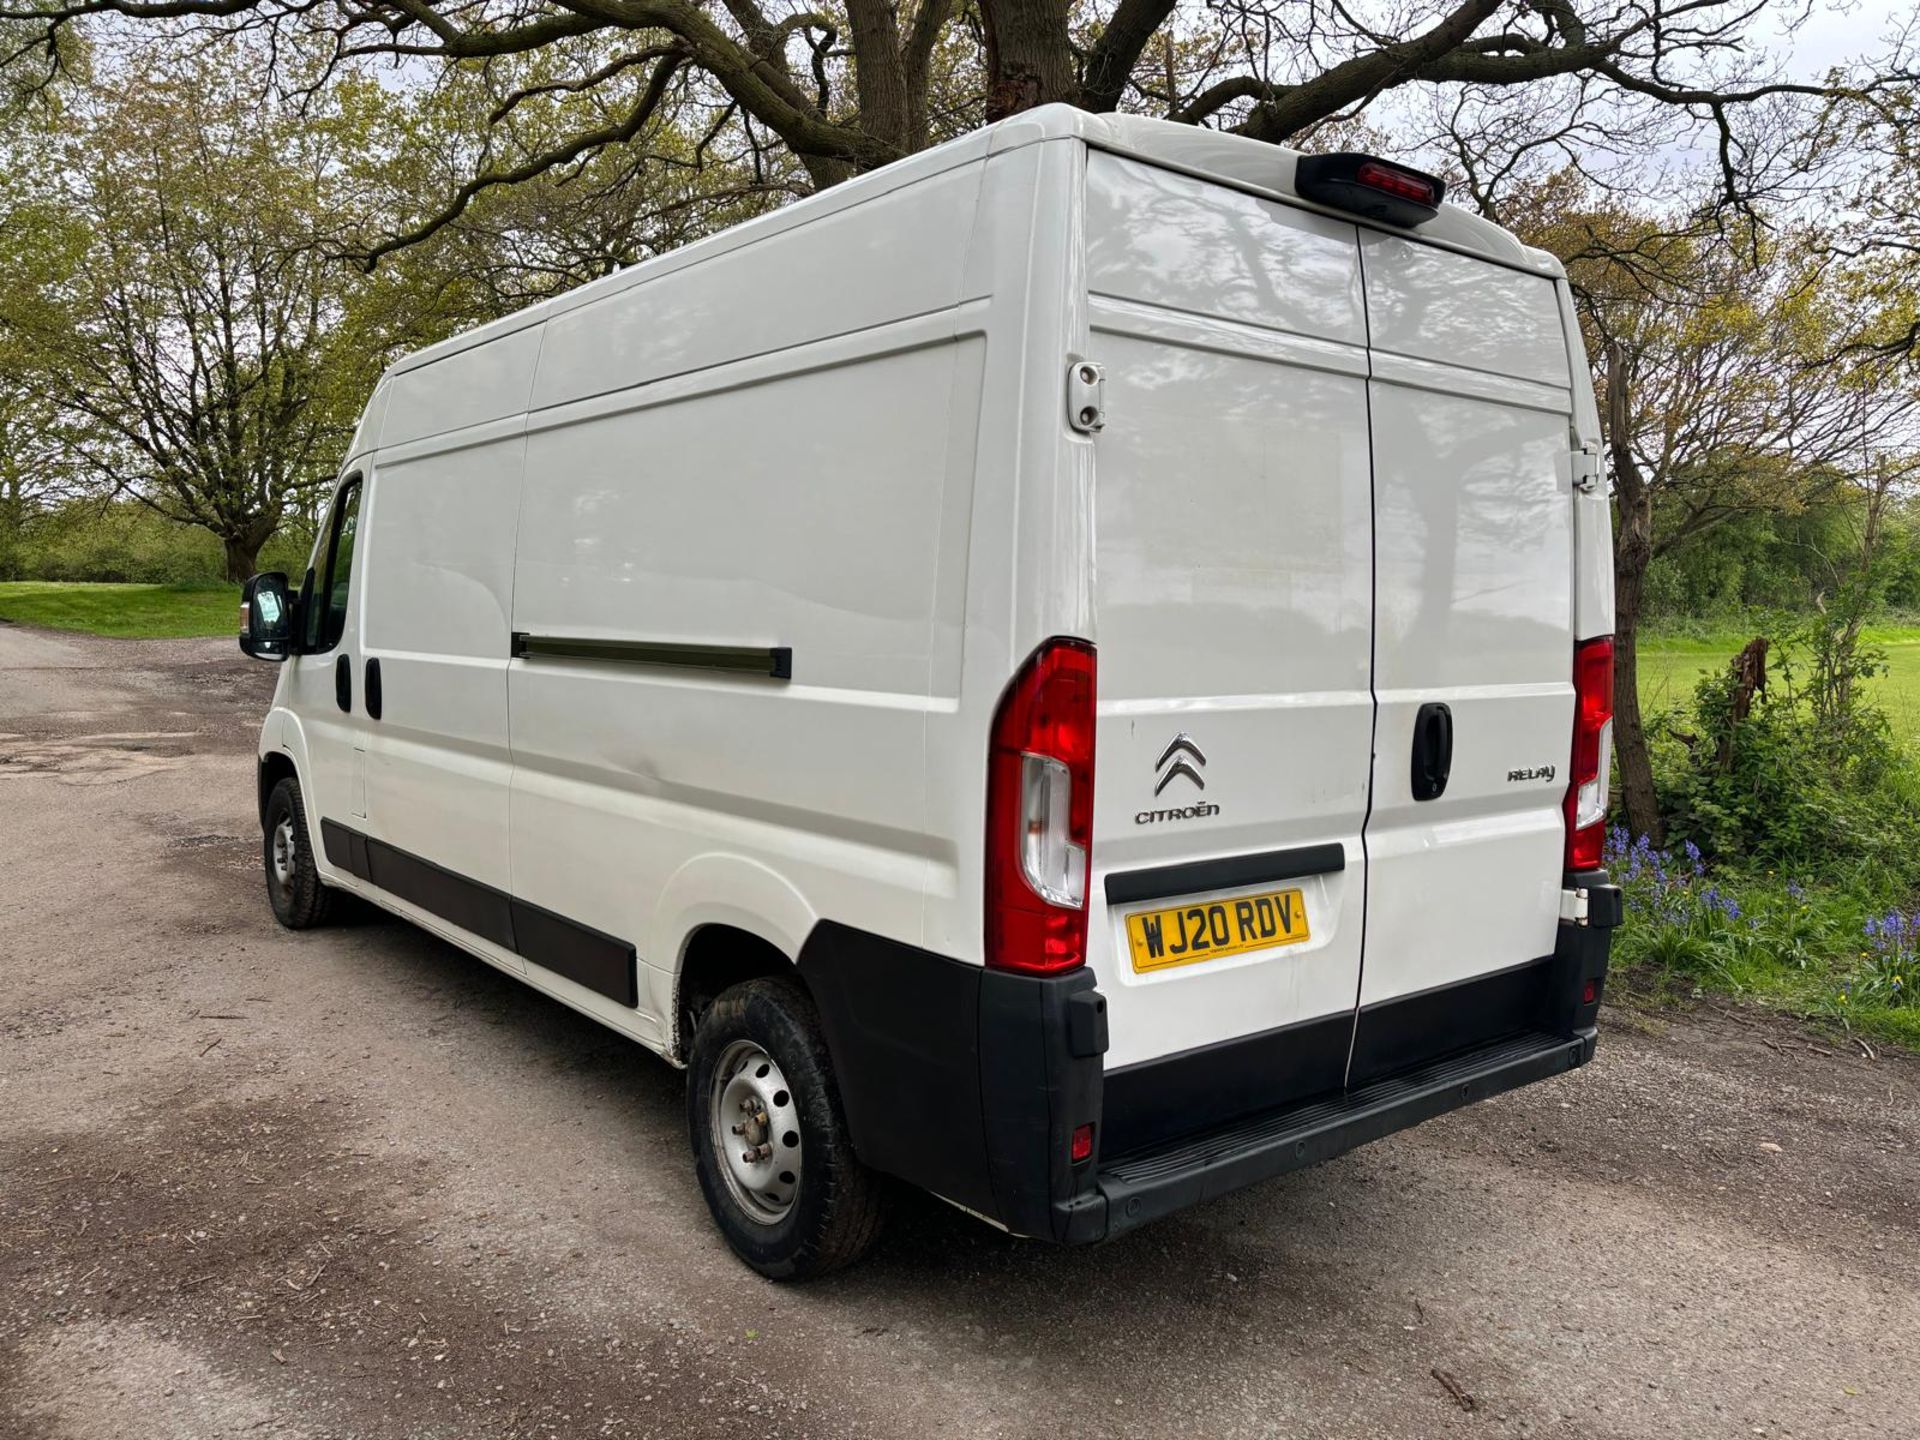 2020 20 CITROEN RELAY PANEL VAN - 2.2 6 SPEED - 109K MILES - AIR CON - EURO 6 - PLY LINED  - Image 9 of 12